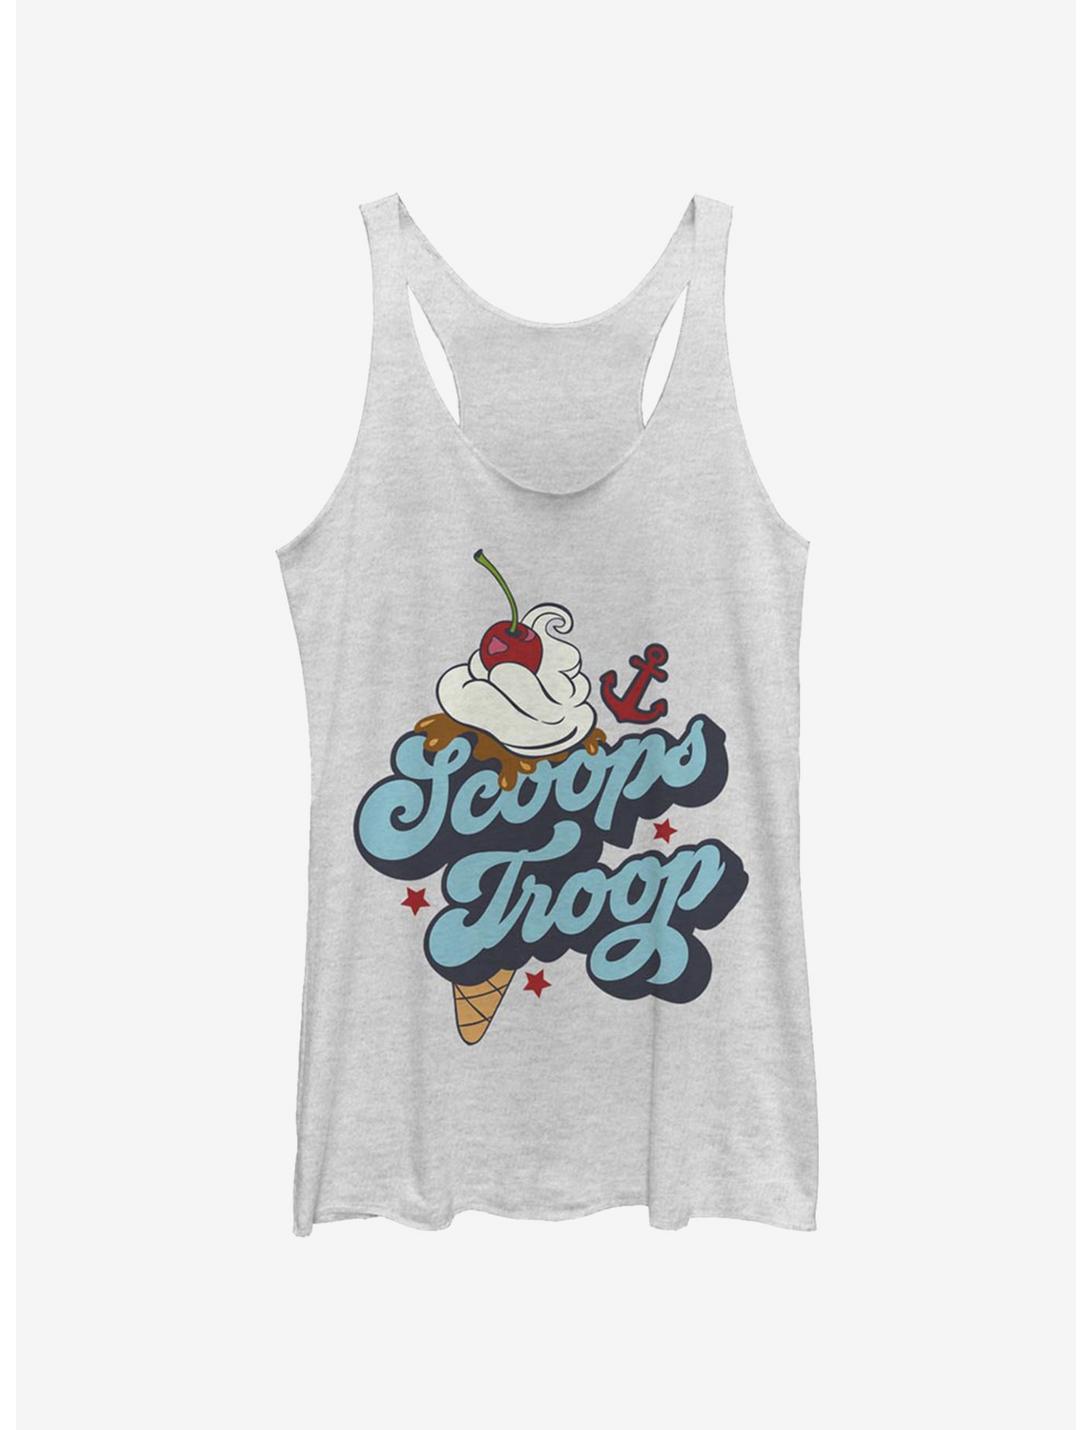 Stranger Things Scoops Troops Womens Tank Top, WHITE HTR, hi-res